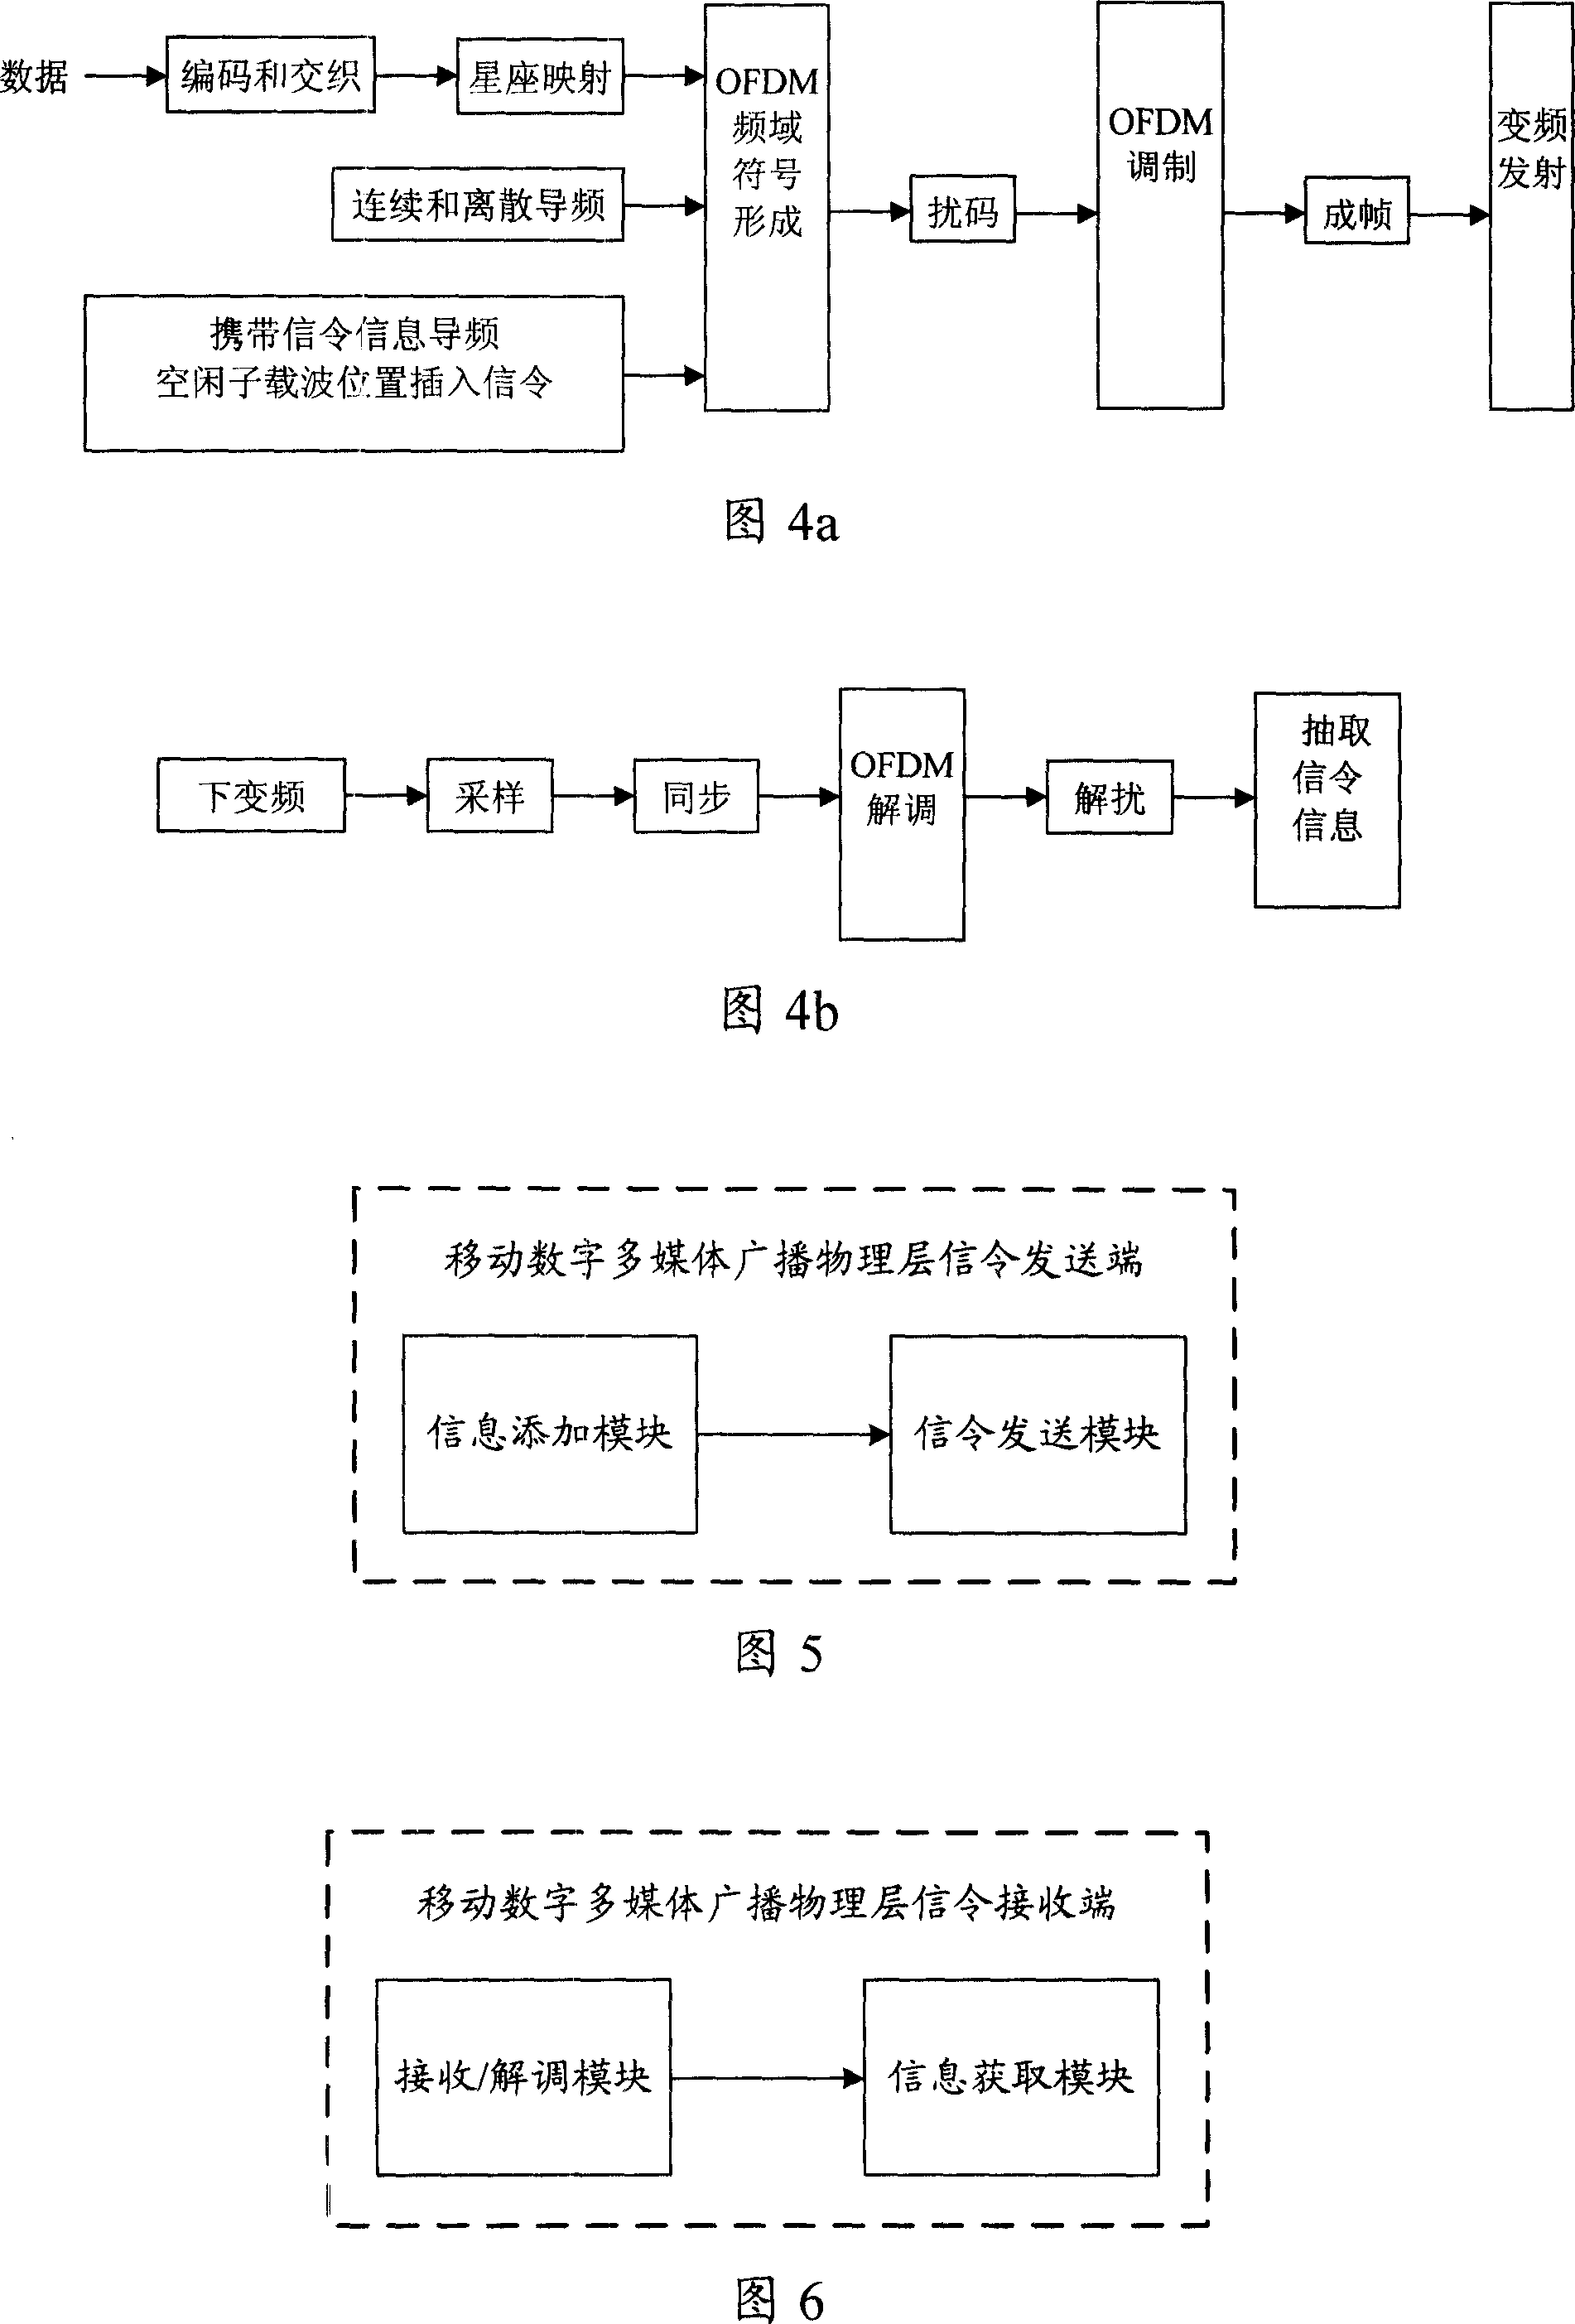 Transmission and receiving method and end of the mobile digital multi-media broadcast physical layer signaling information